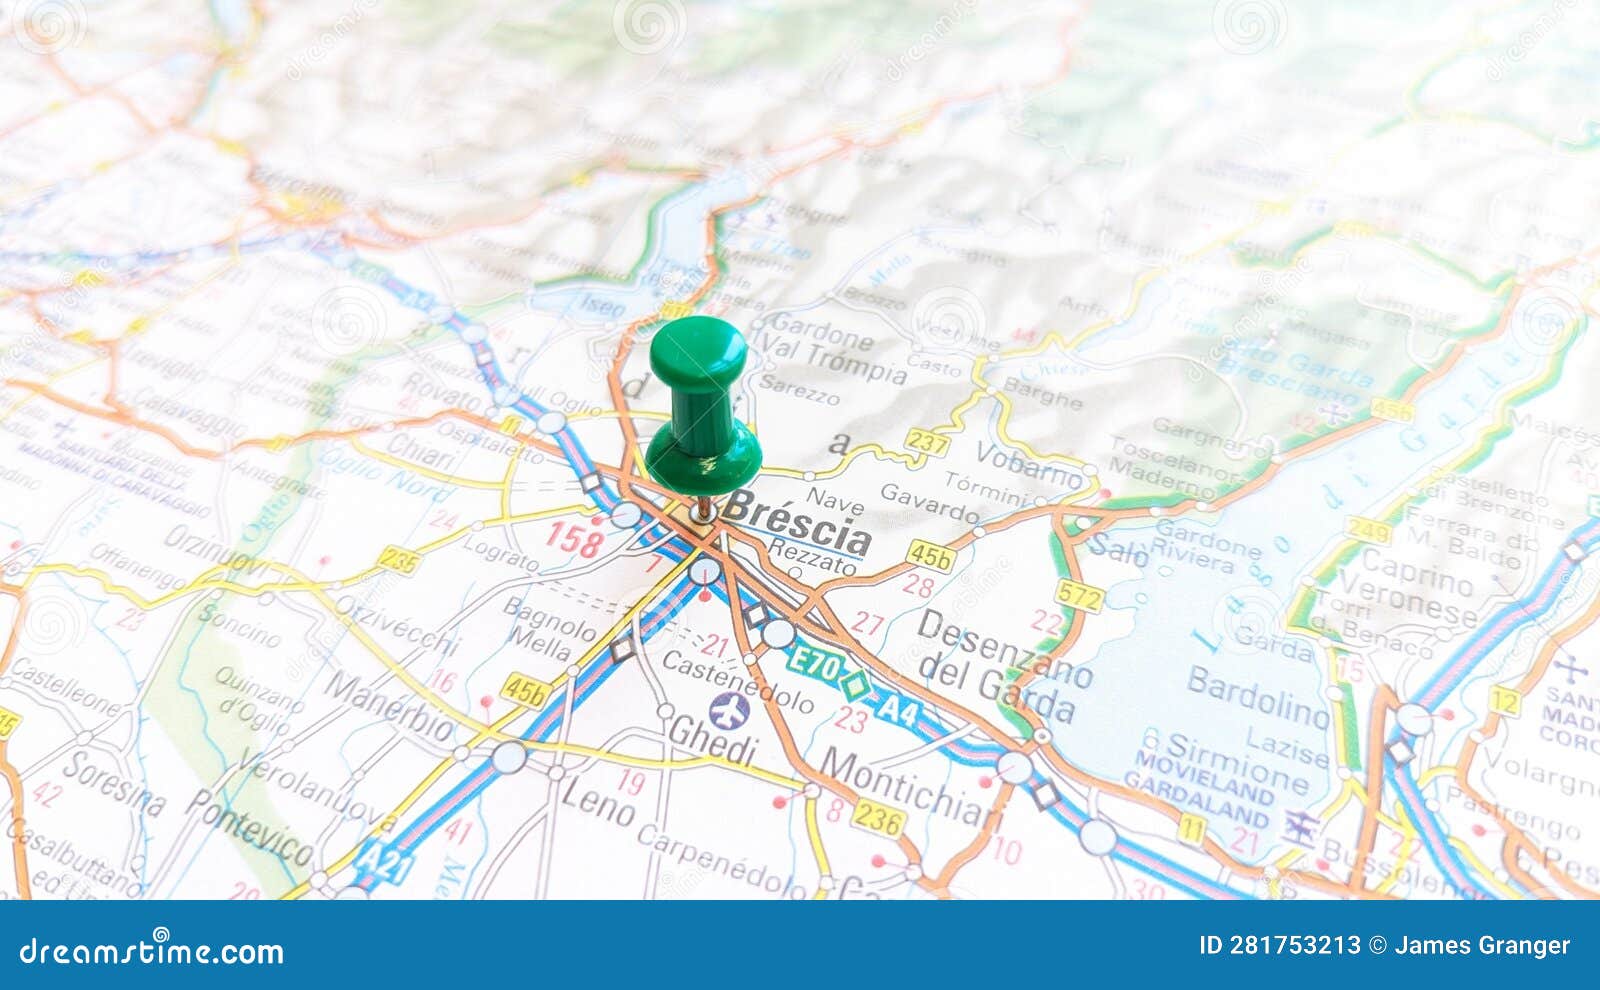 a green board pin stuck in brescia on a map of italy